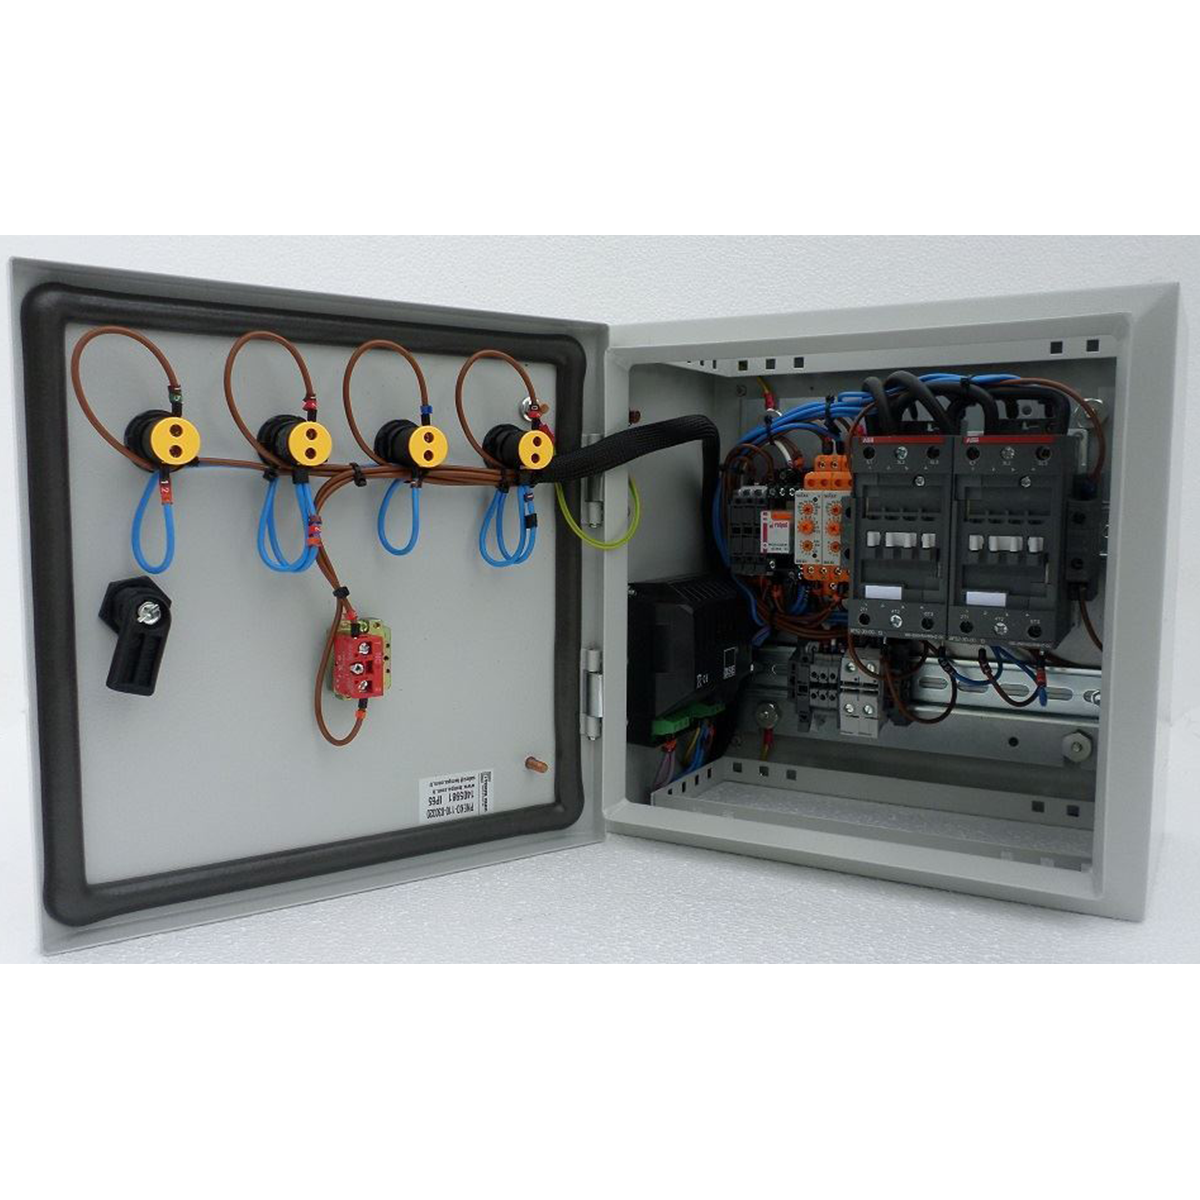 Hyundai ATS Automatic Transfer Switch Package for Single Phase